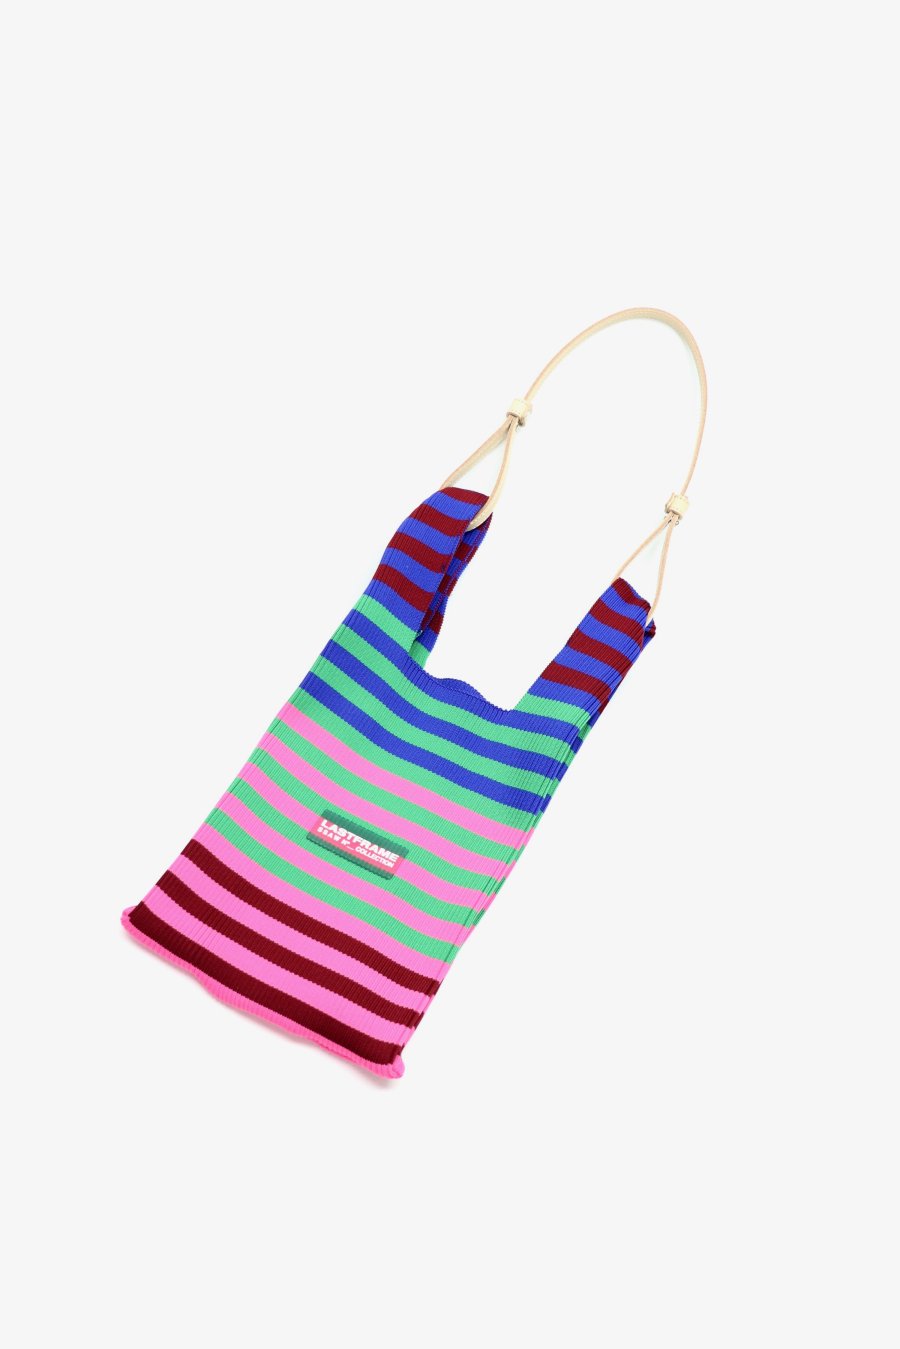 LASTFRAME  MULTI STRIPE MARKET BAG SMALL 2<img class='new_mark_img2' src='https://img.shop-pro.jp/img/new/icons15.gif' style='border:none;display:inline;margin:0px;padding:0px;width:auto;' />